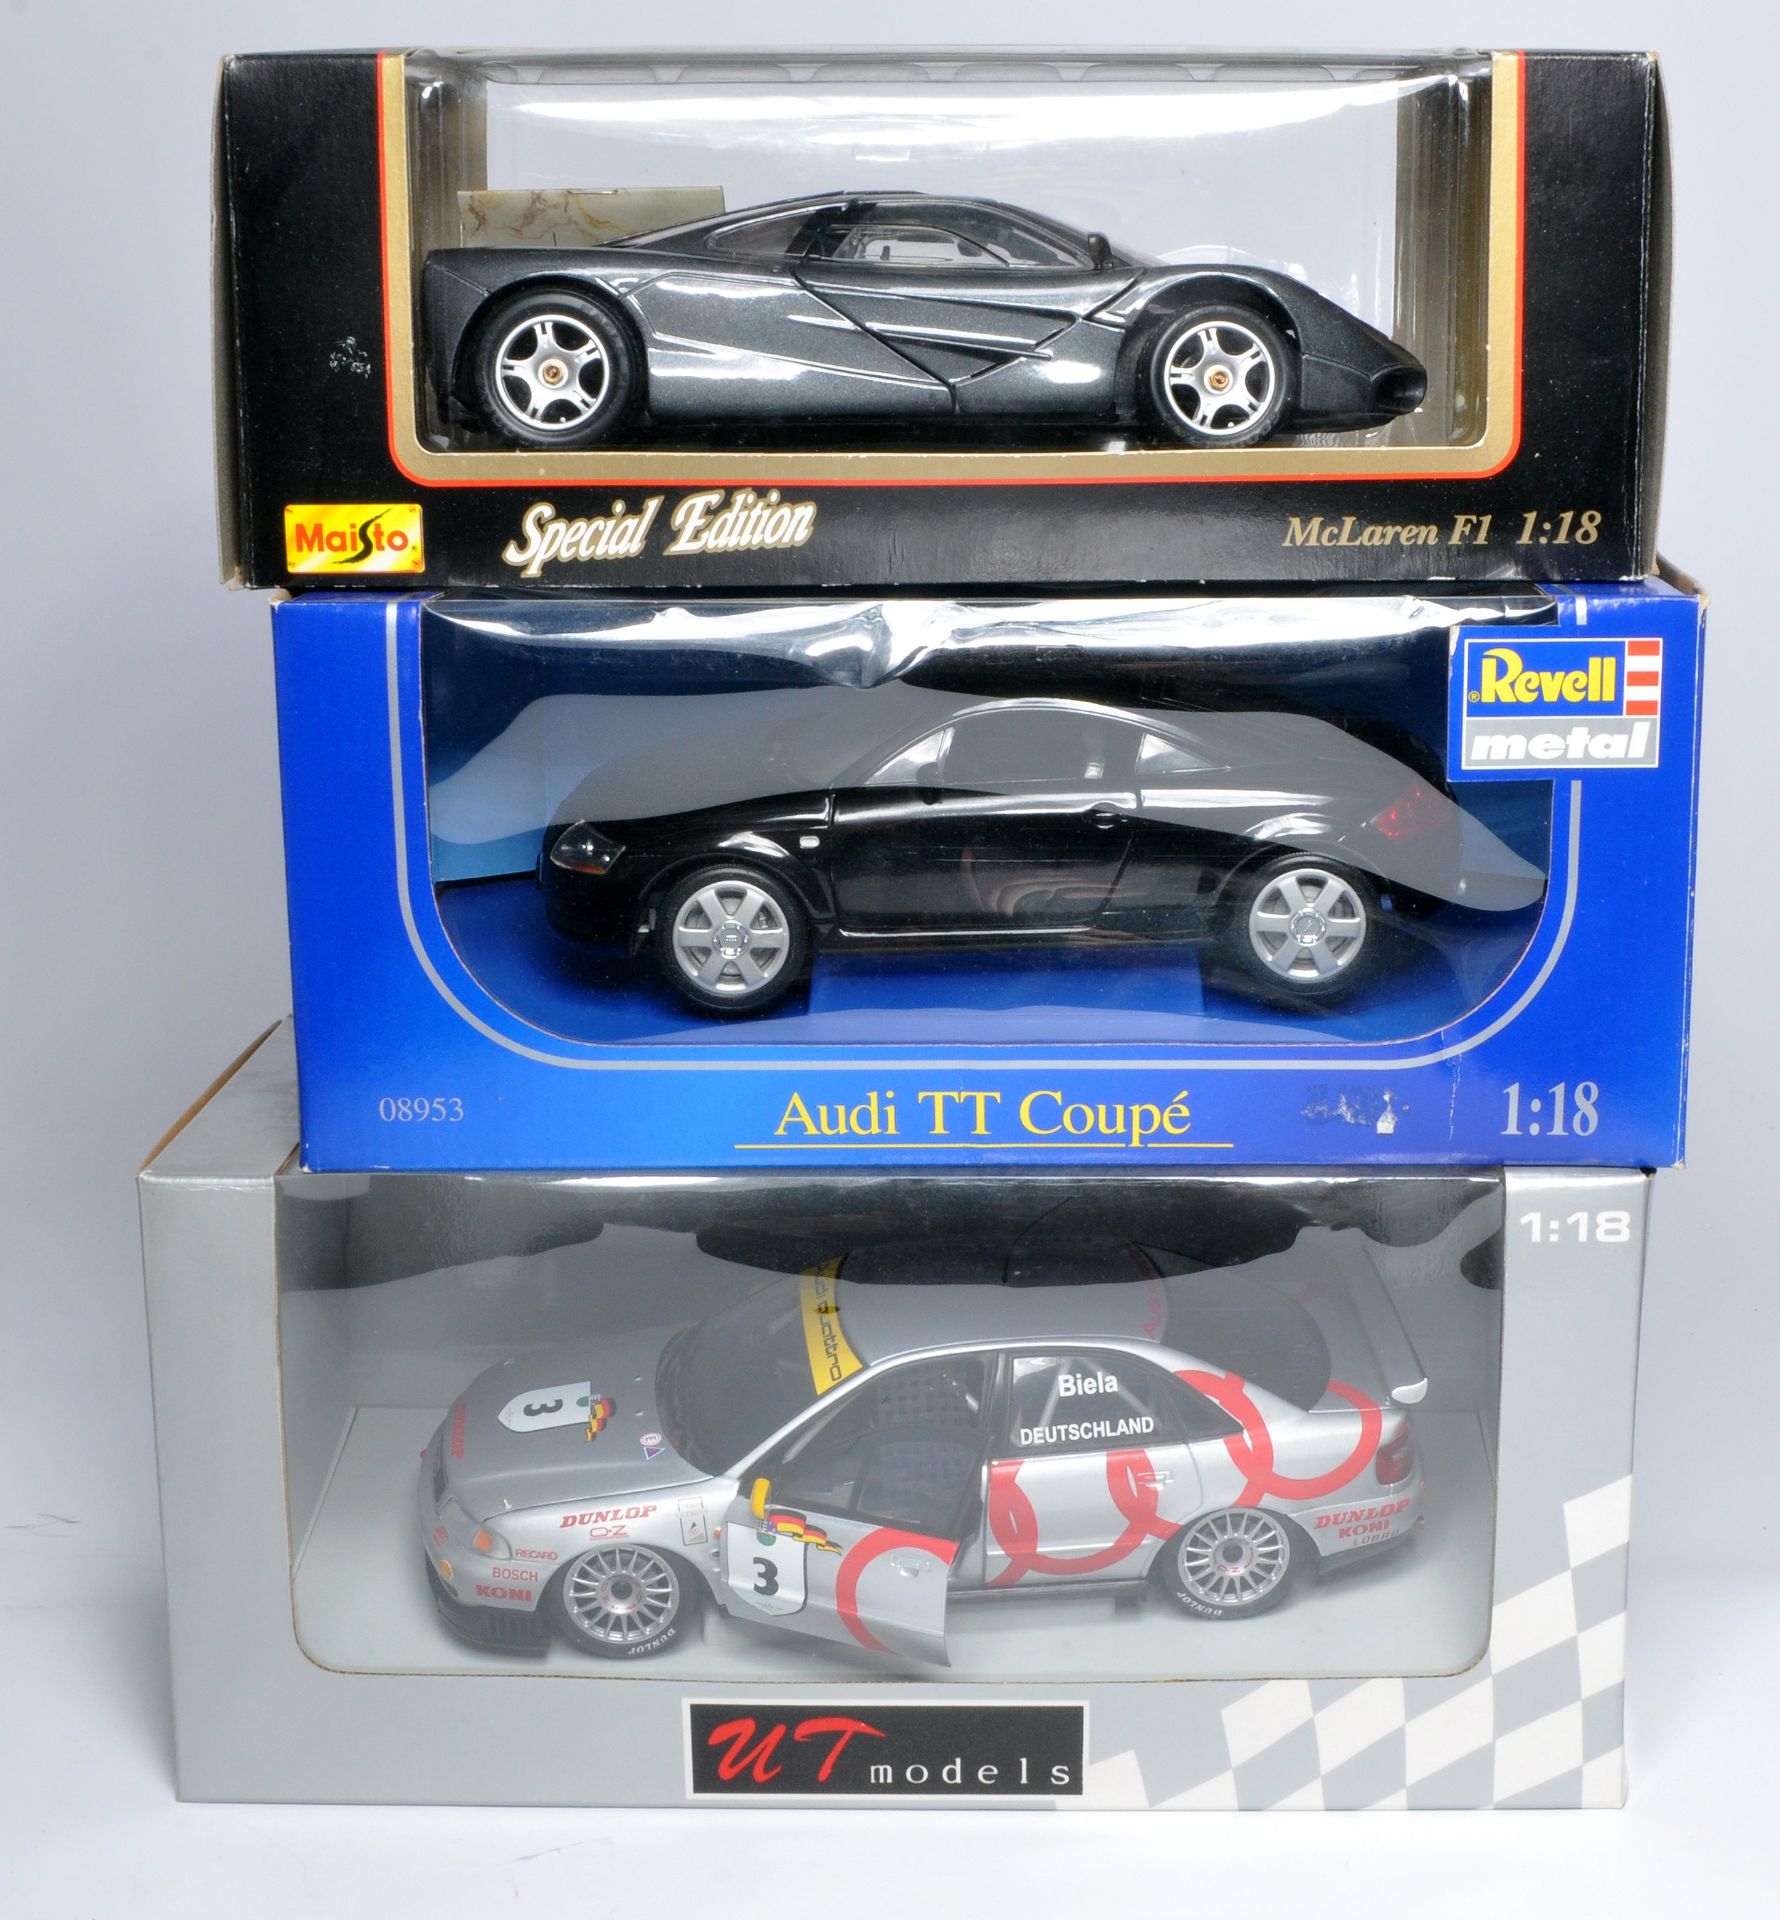 Trio of 1/18 diecast model cars from Maisto, Audi TT and UT Models. Look to be without obvious